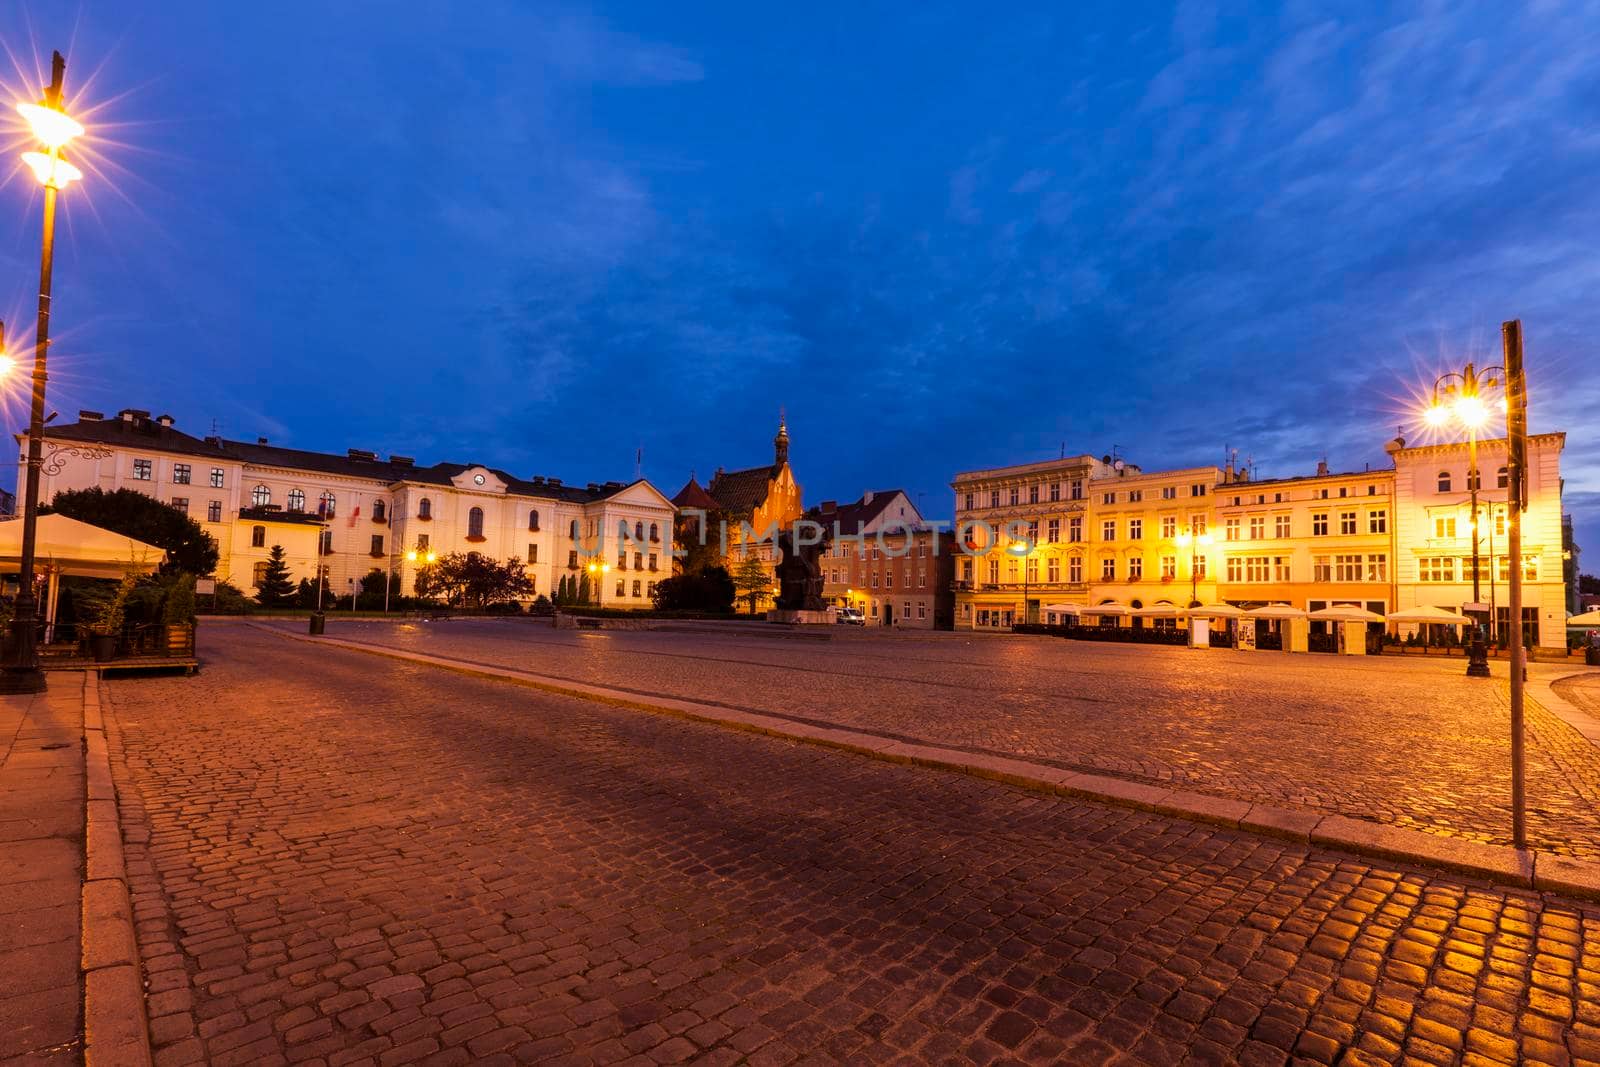 Old town square in Bydgoszcz by benkrut